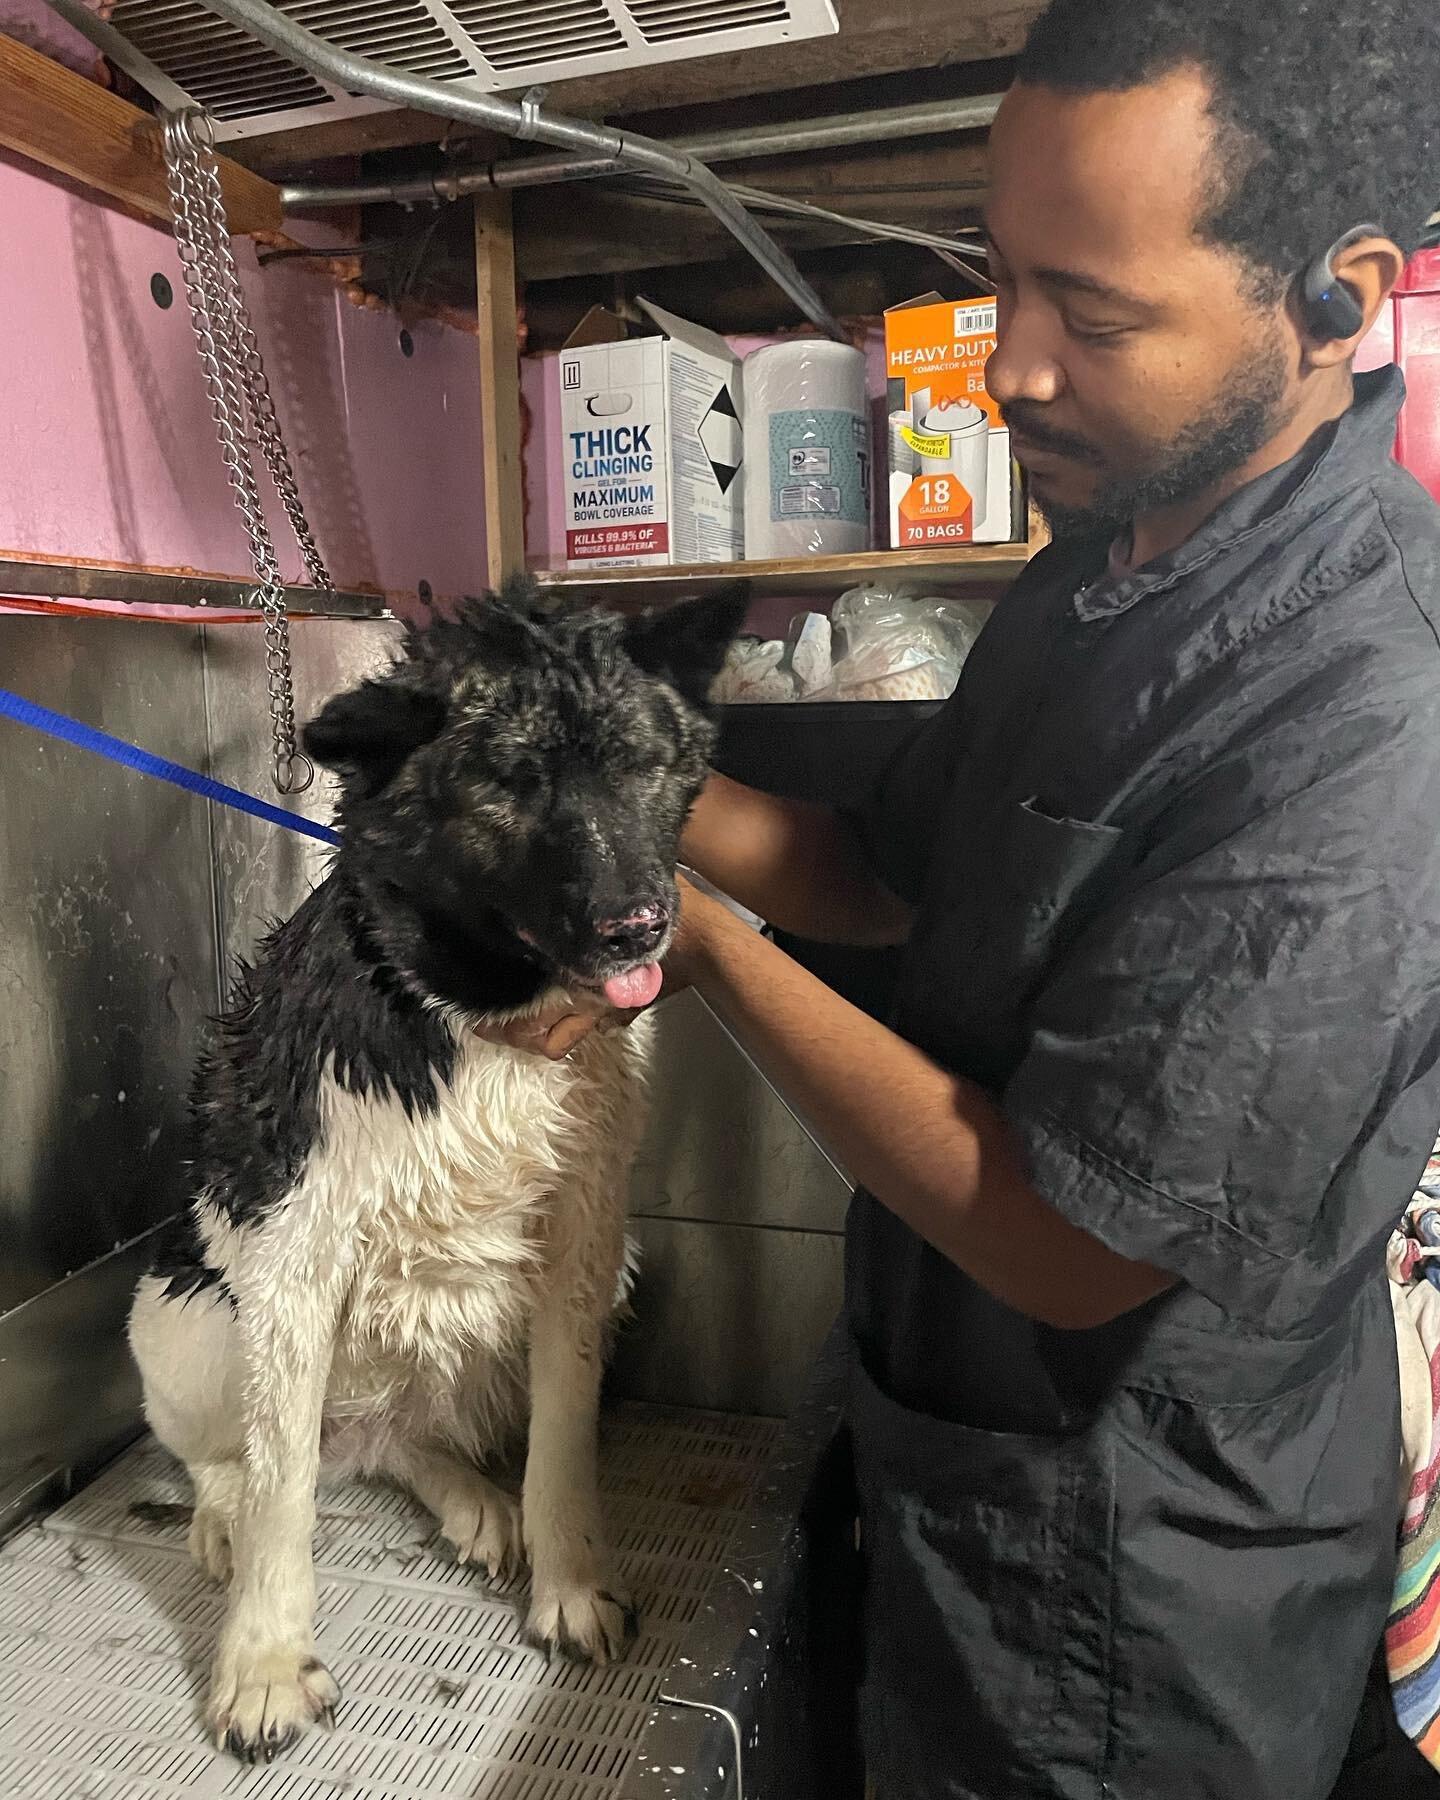 New Groomer Deon and Hayley SPA DAY YAY! 
.
.
.
.
#bowwowmeowpurrfessionalpetcare #bowwowbarkery #dogs #chicago #chicagodogs #Dogsofinstagram #cats #glutenfree #organic #petcare #pets #catsofinstagram #ubereats #doordash #dogtreats #chicagocats #cats